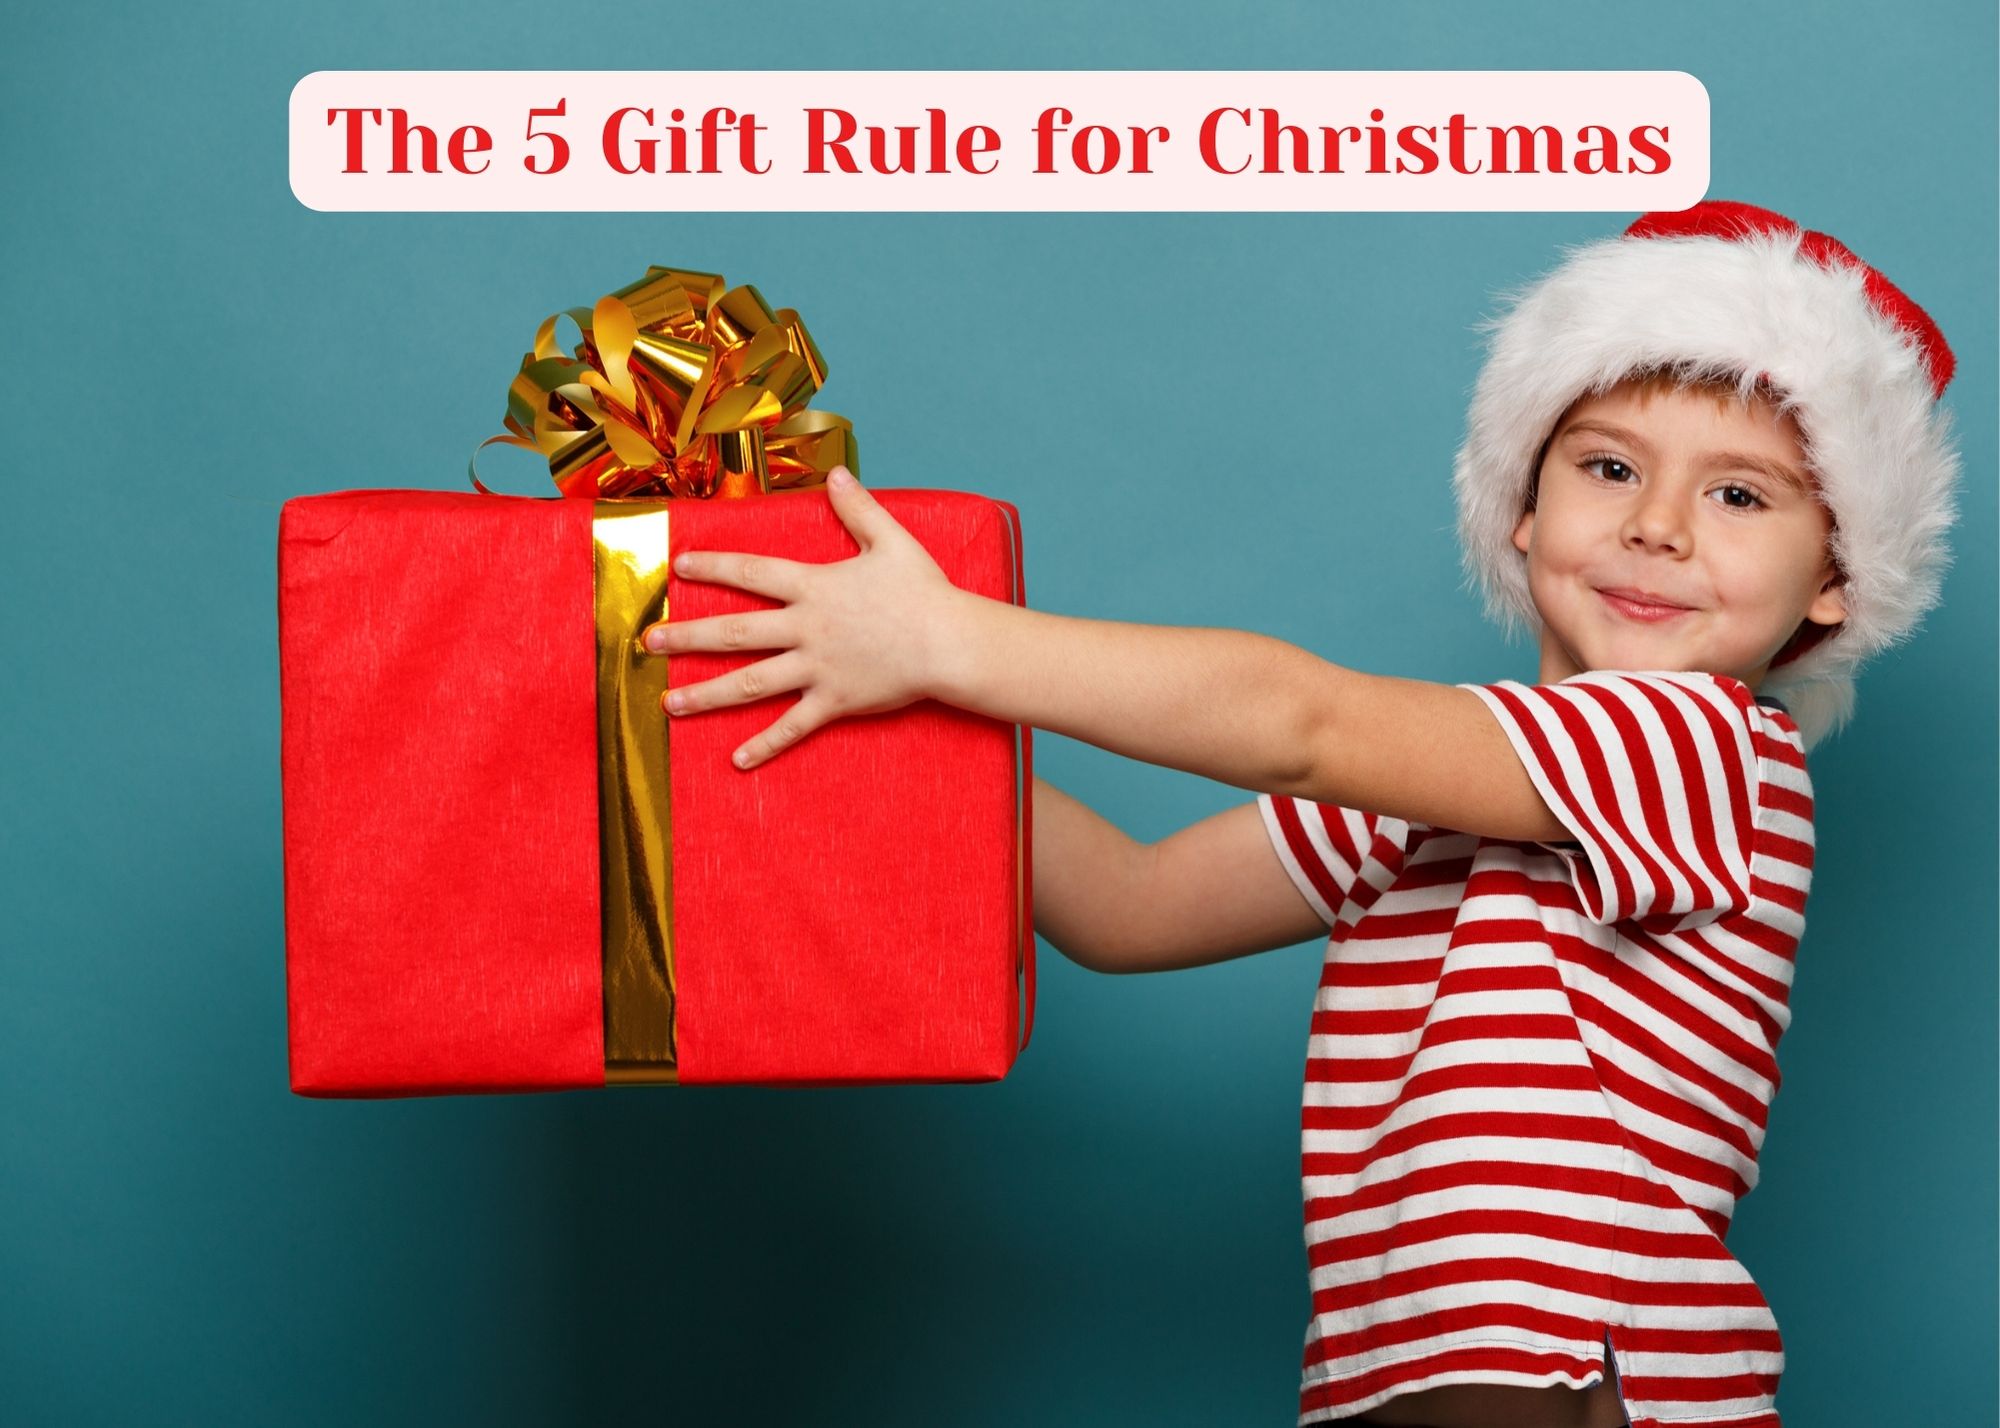 The 5 Gift Rule for Christmas